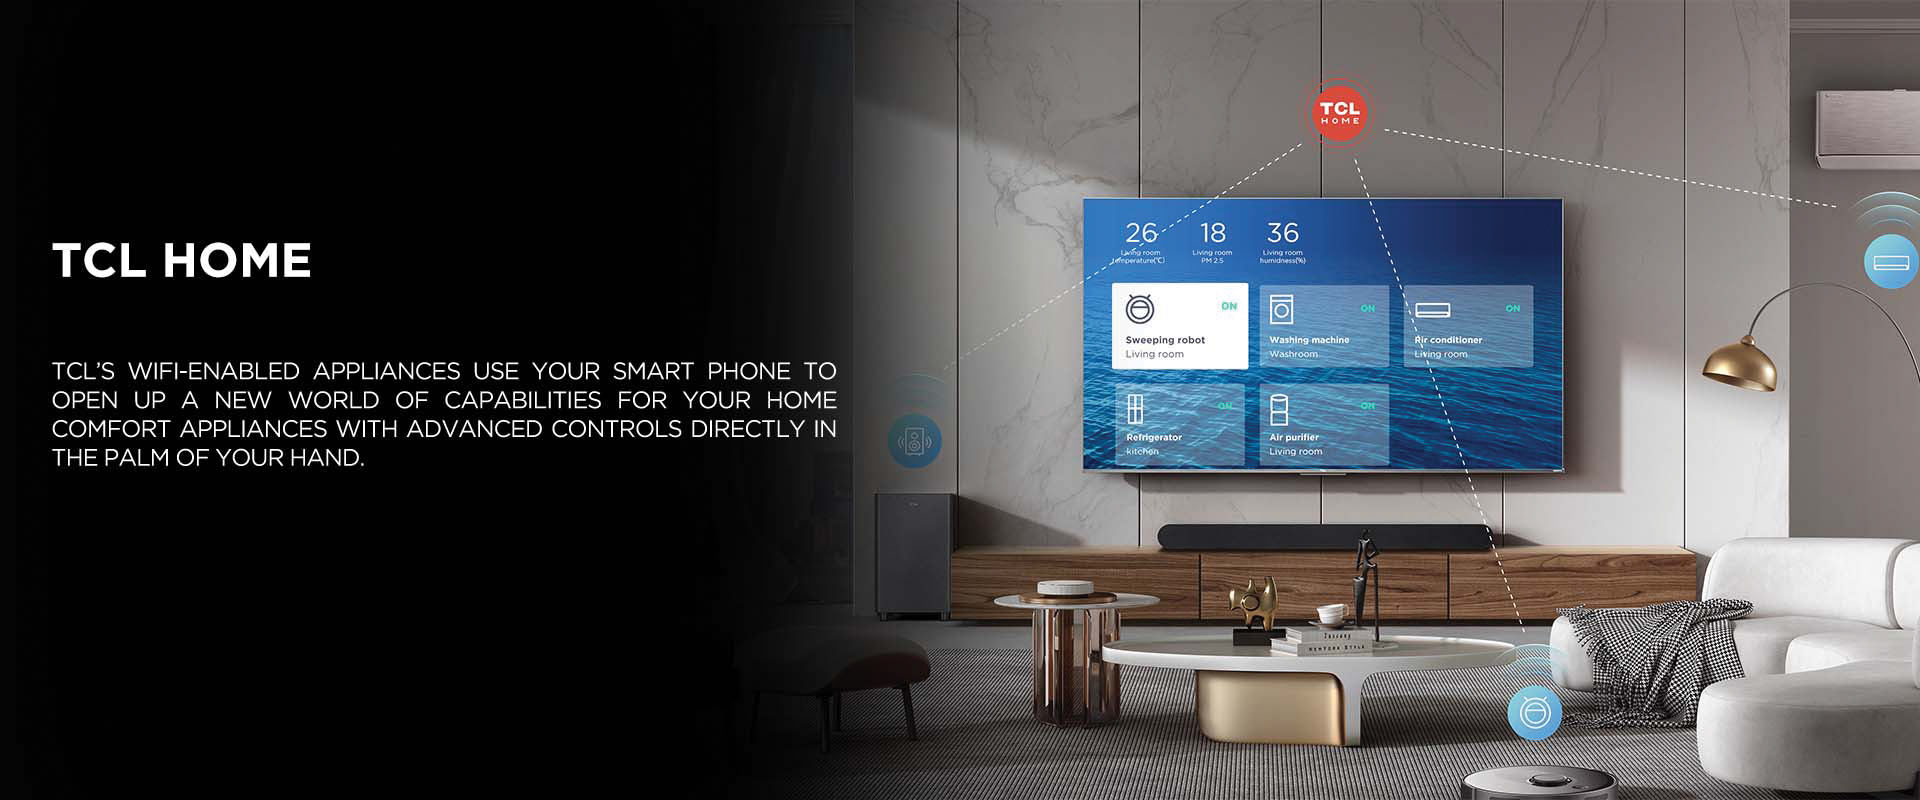 TCL HOME - TCL’s WiFi-enabled appliances use your smart phone to open up a new world of capabilities for your home comfort appliances with advanced controls directly in the palm of your hand.